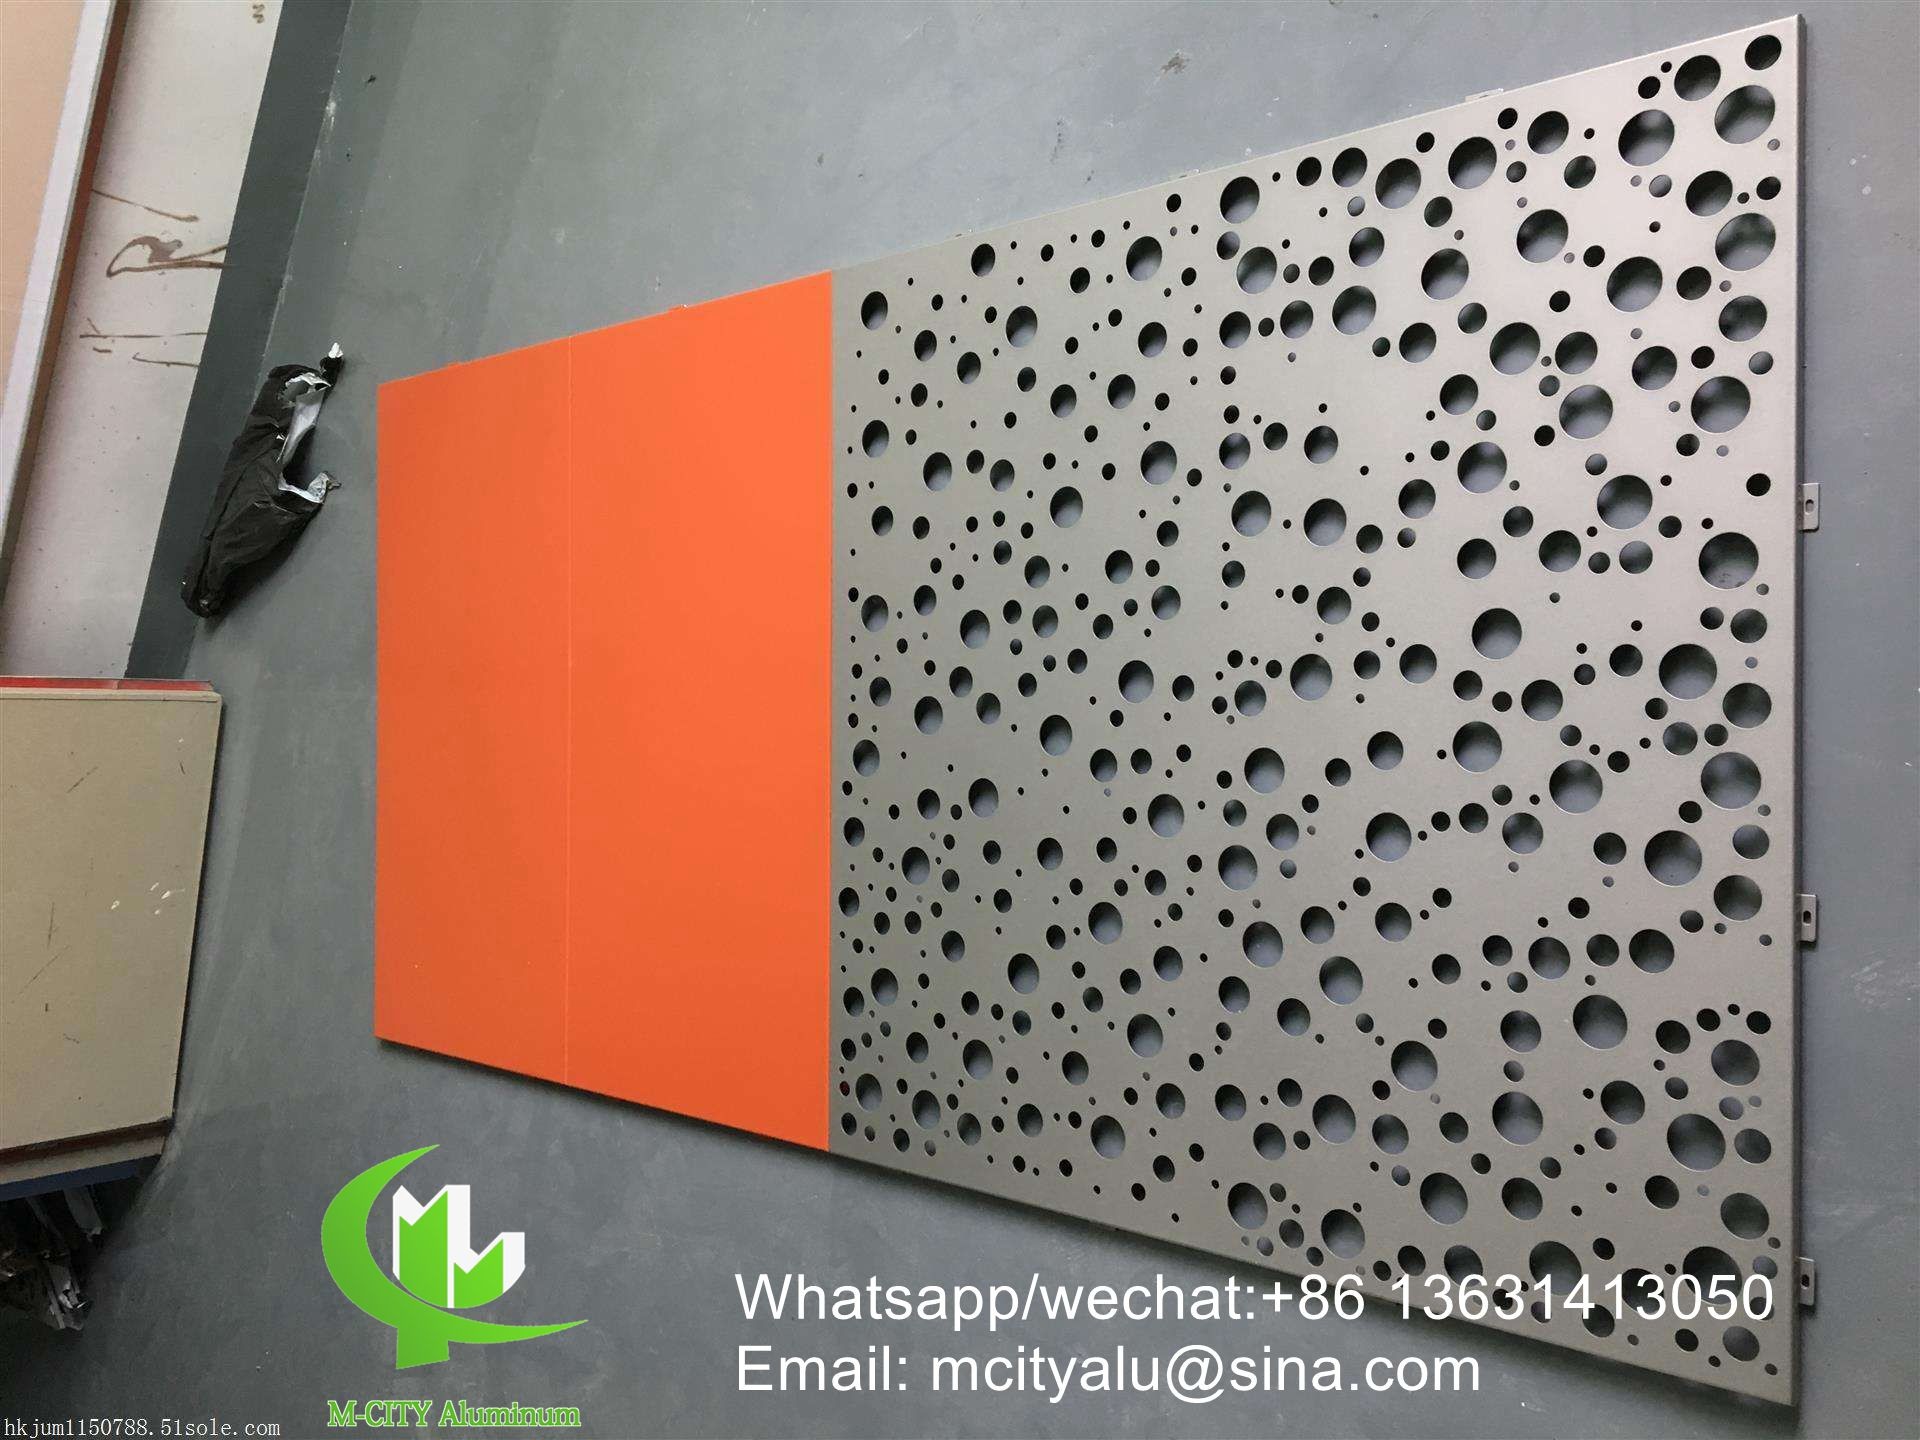 perforated 3mm metal aluminum cladding panel with powder coated for facade curtain wall solid panel single panel